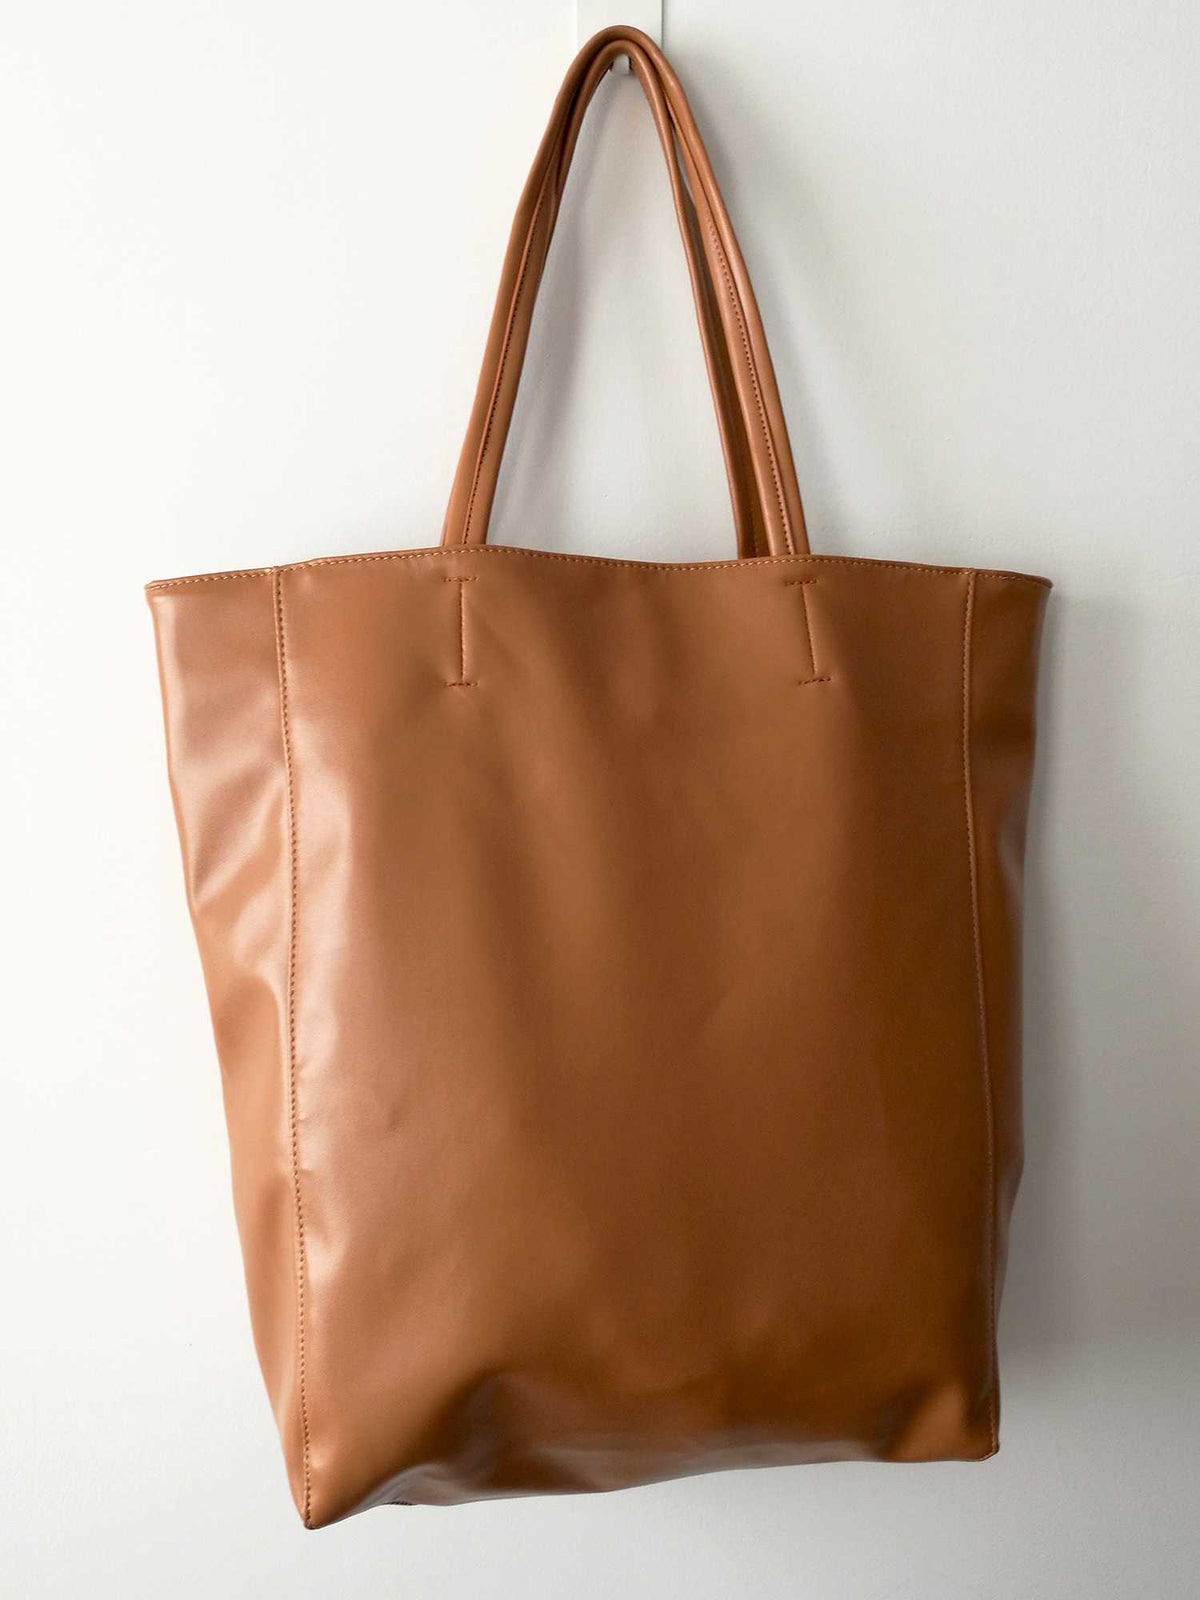 Oversized Eco Vegan Leather Lambskin Tote Bag 16.7" With Little Purse Inside - worthtryit.com